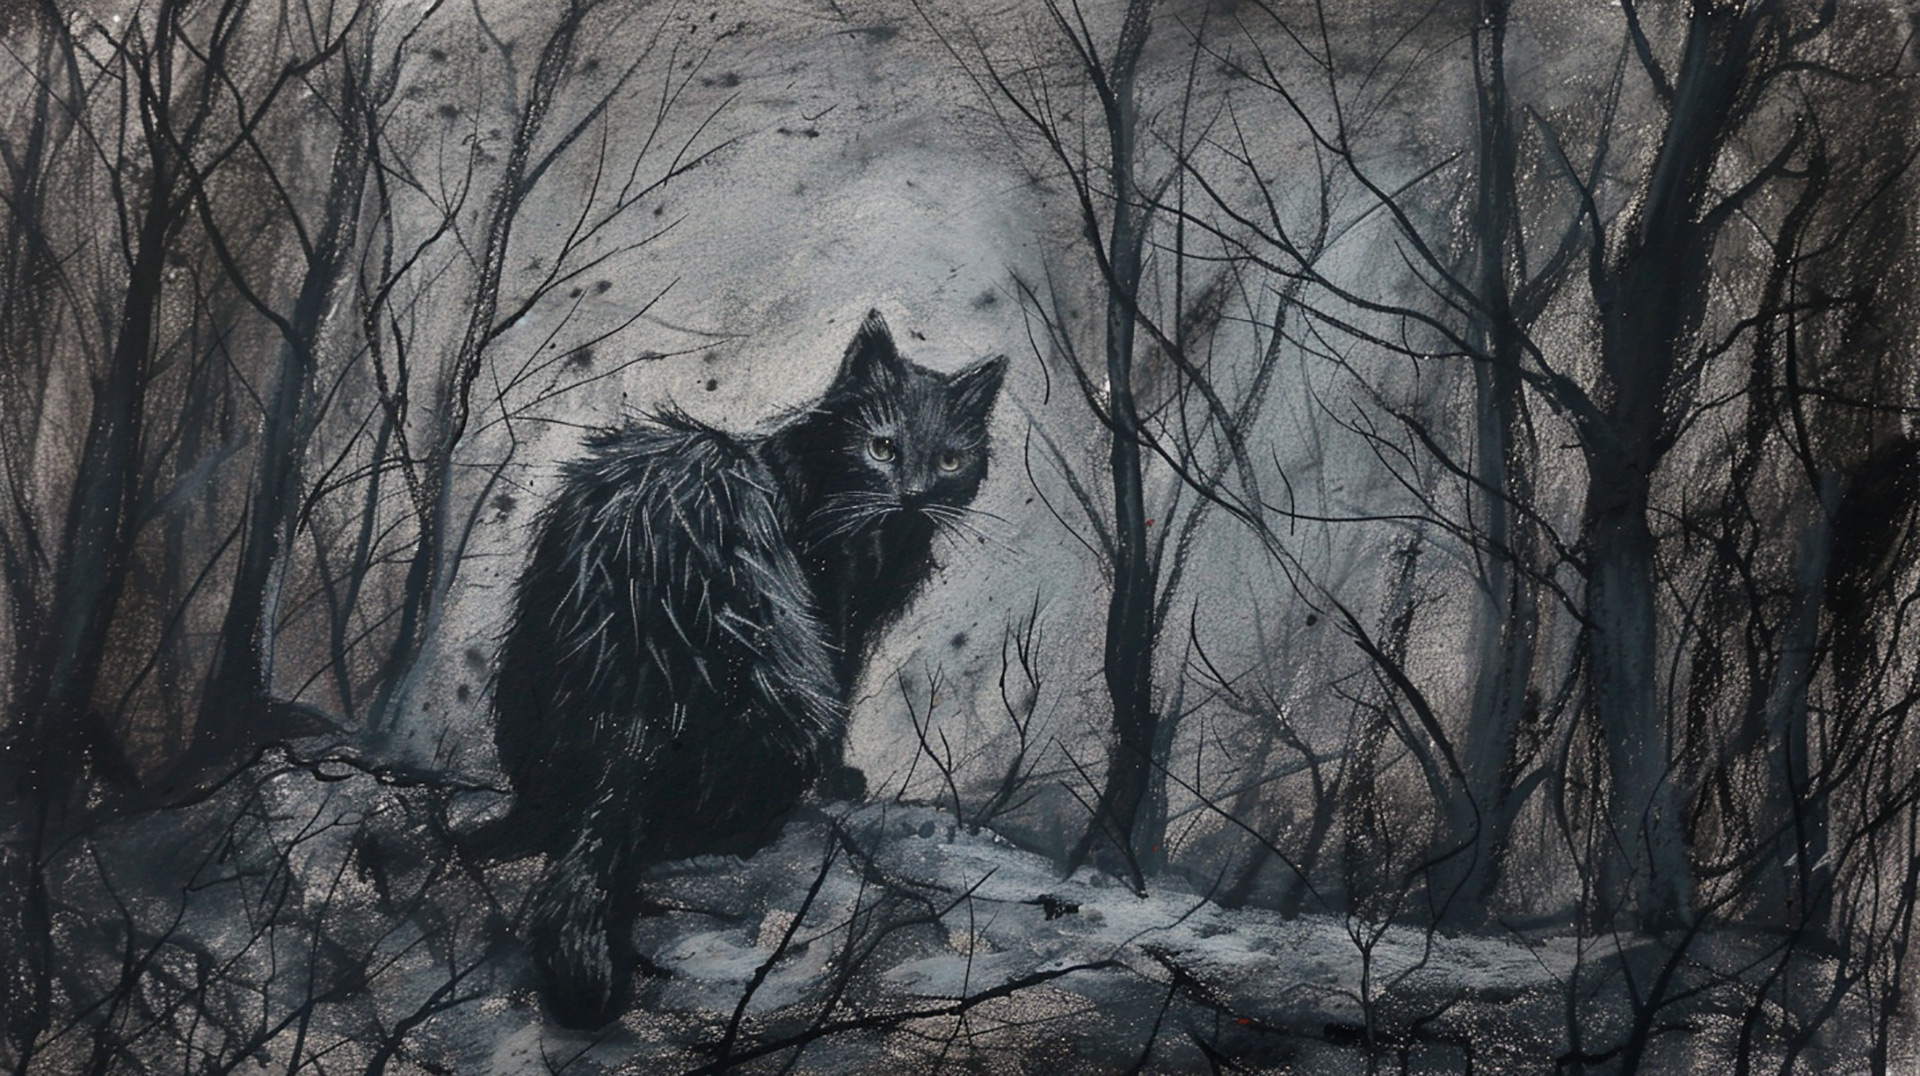 Explore Minimal Art: Grey Cat in a Mysterious Forest Background